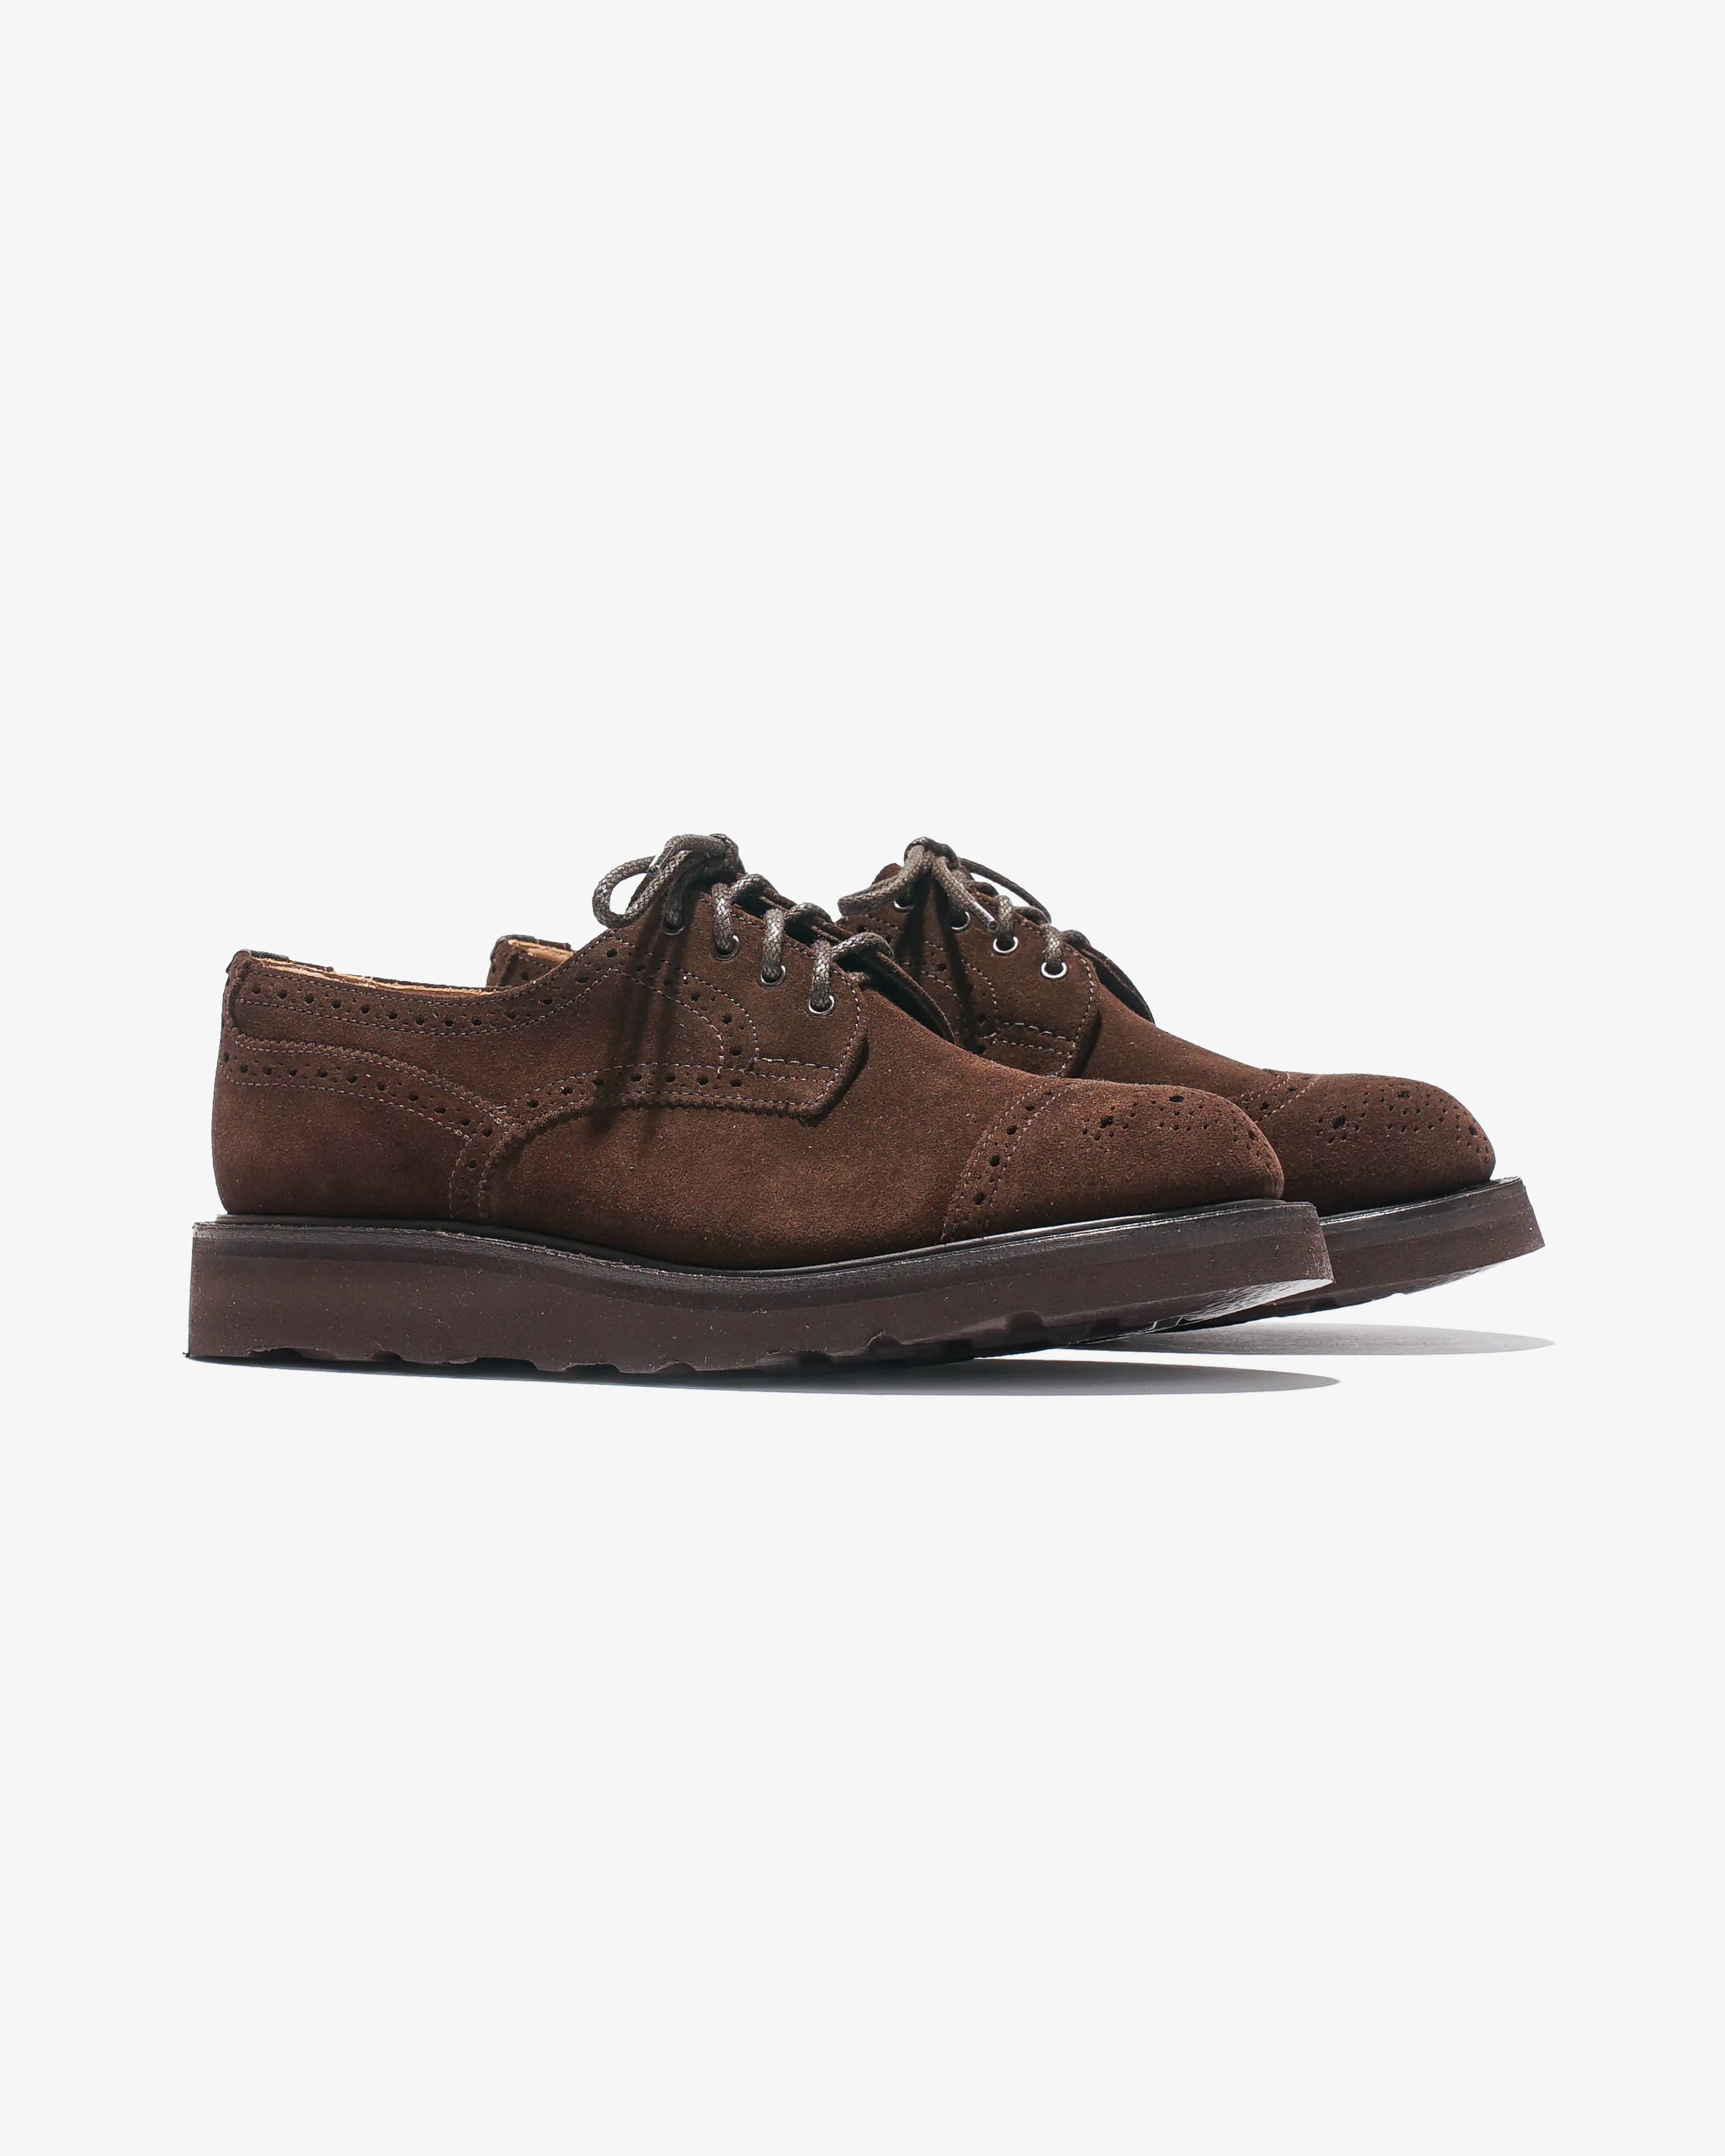 Tricker's x Nepenthes Asymmetric Gibson Brogues - Moreflex Sole - Brown Suede